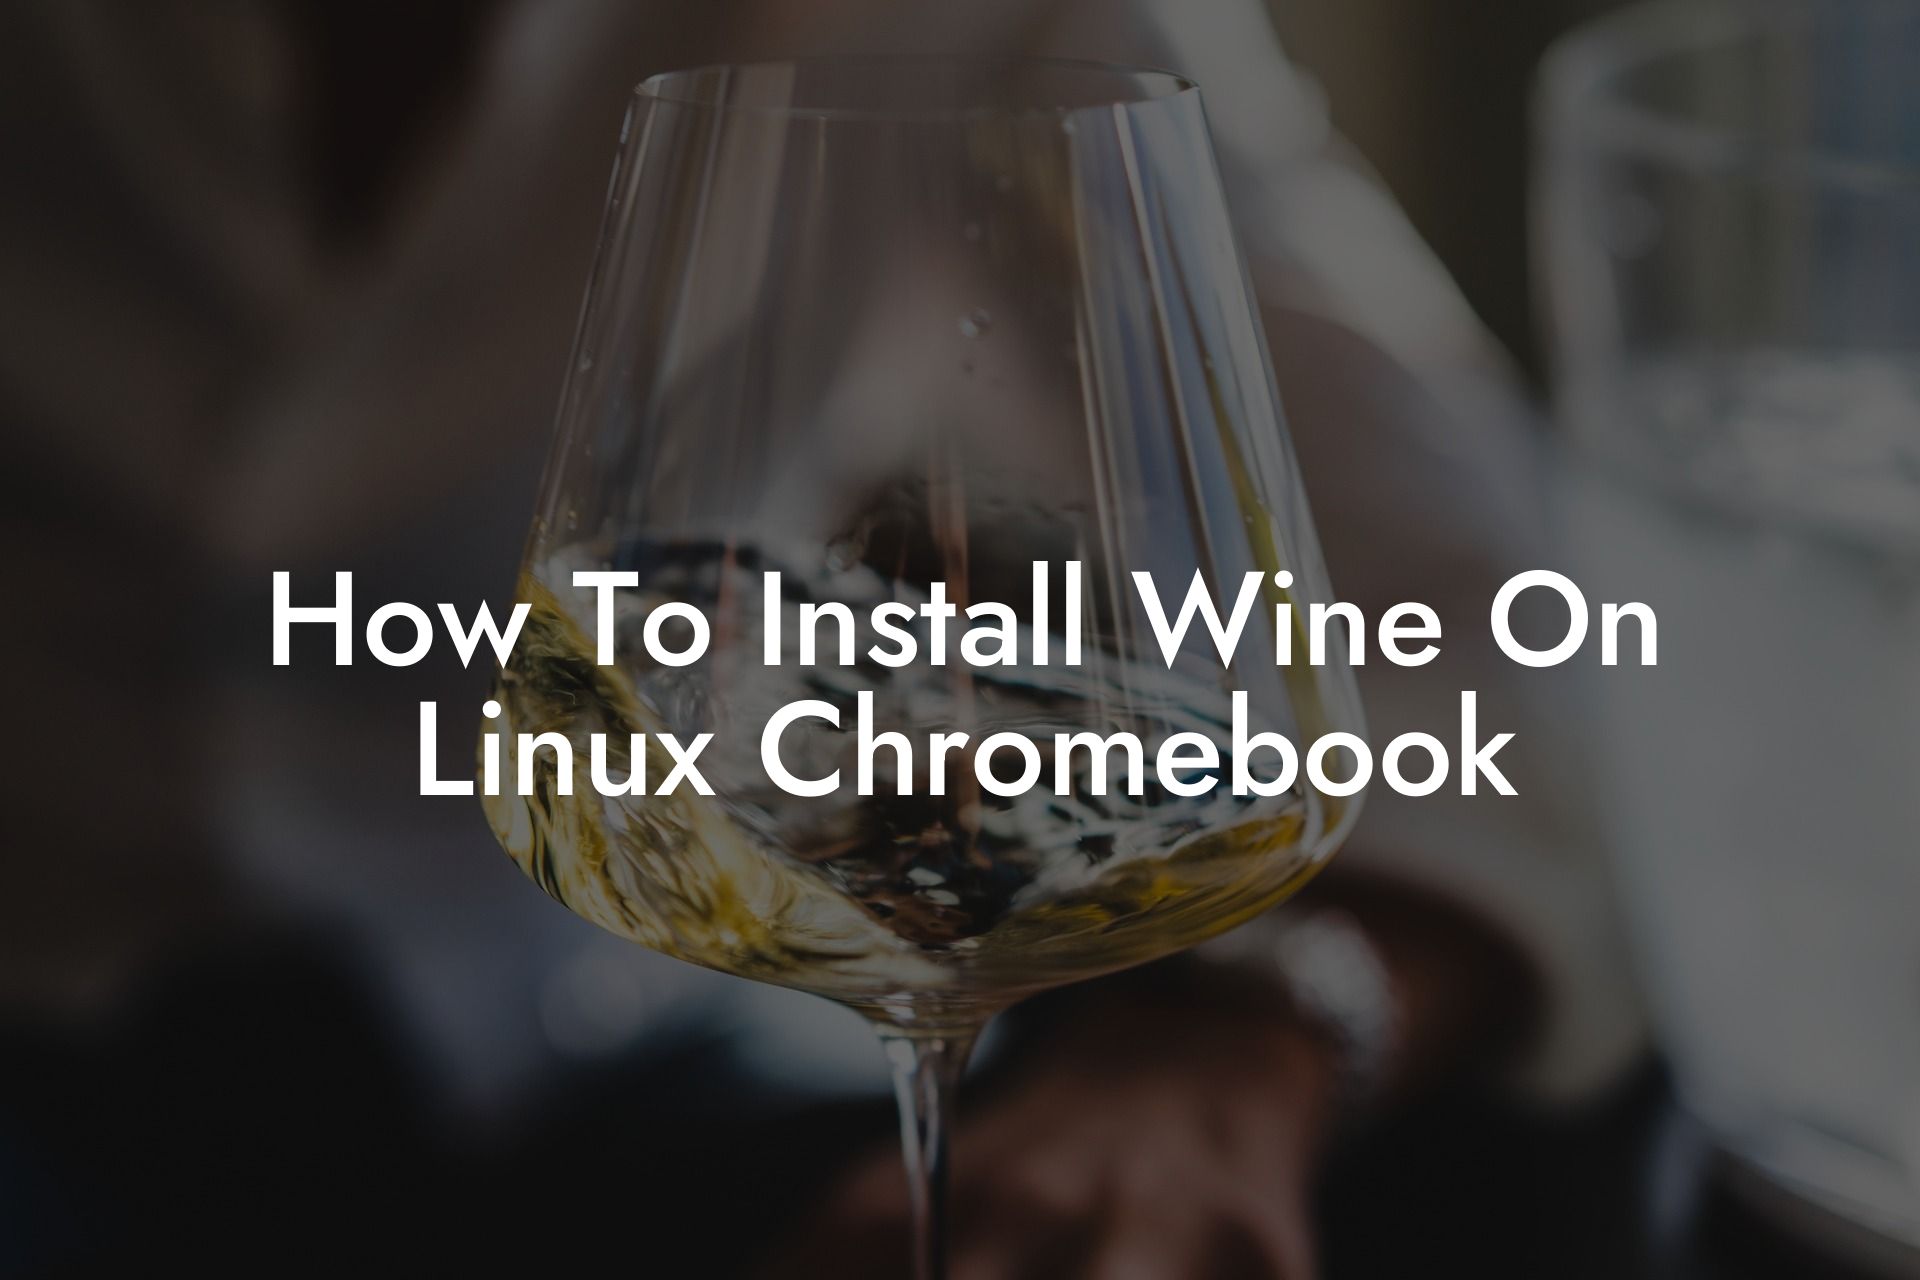 How To Install Wine On Linux Chromebook